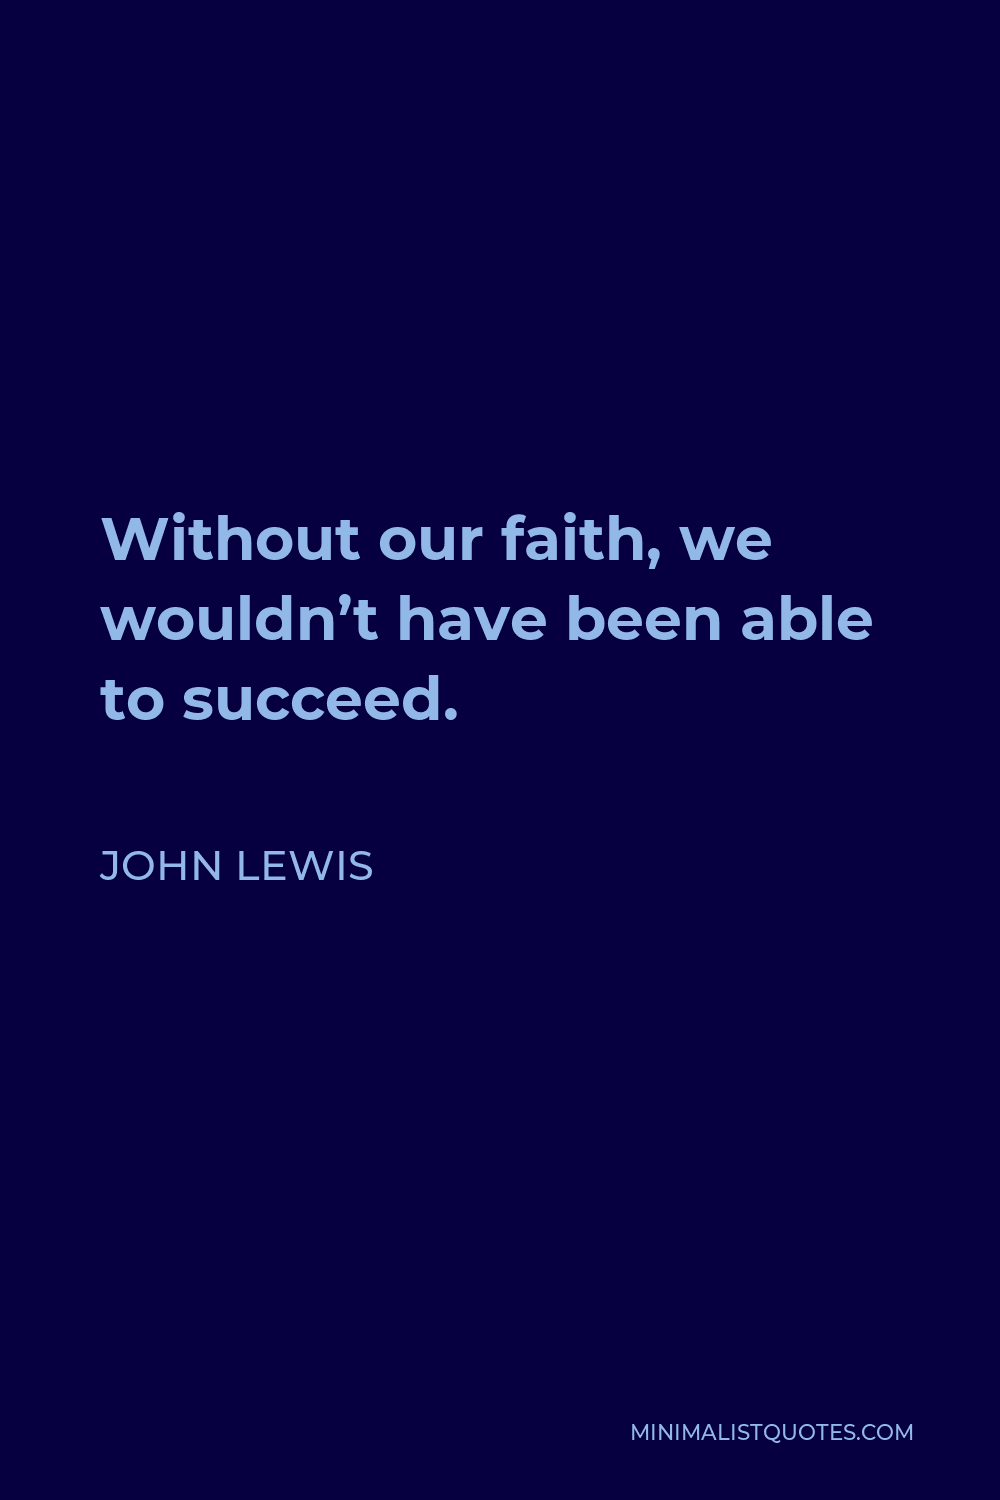 John Lewis Quote - Without our faith, we wouldn’t have been able to succeed.